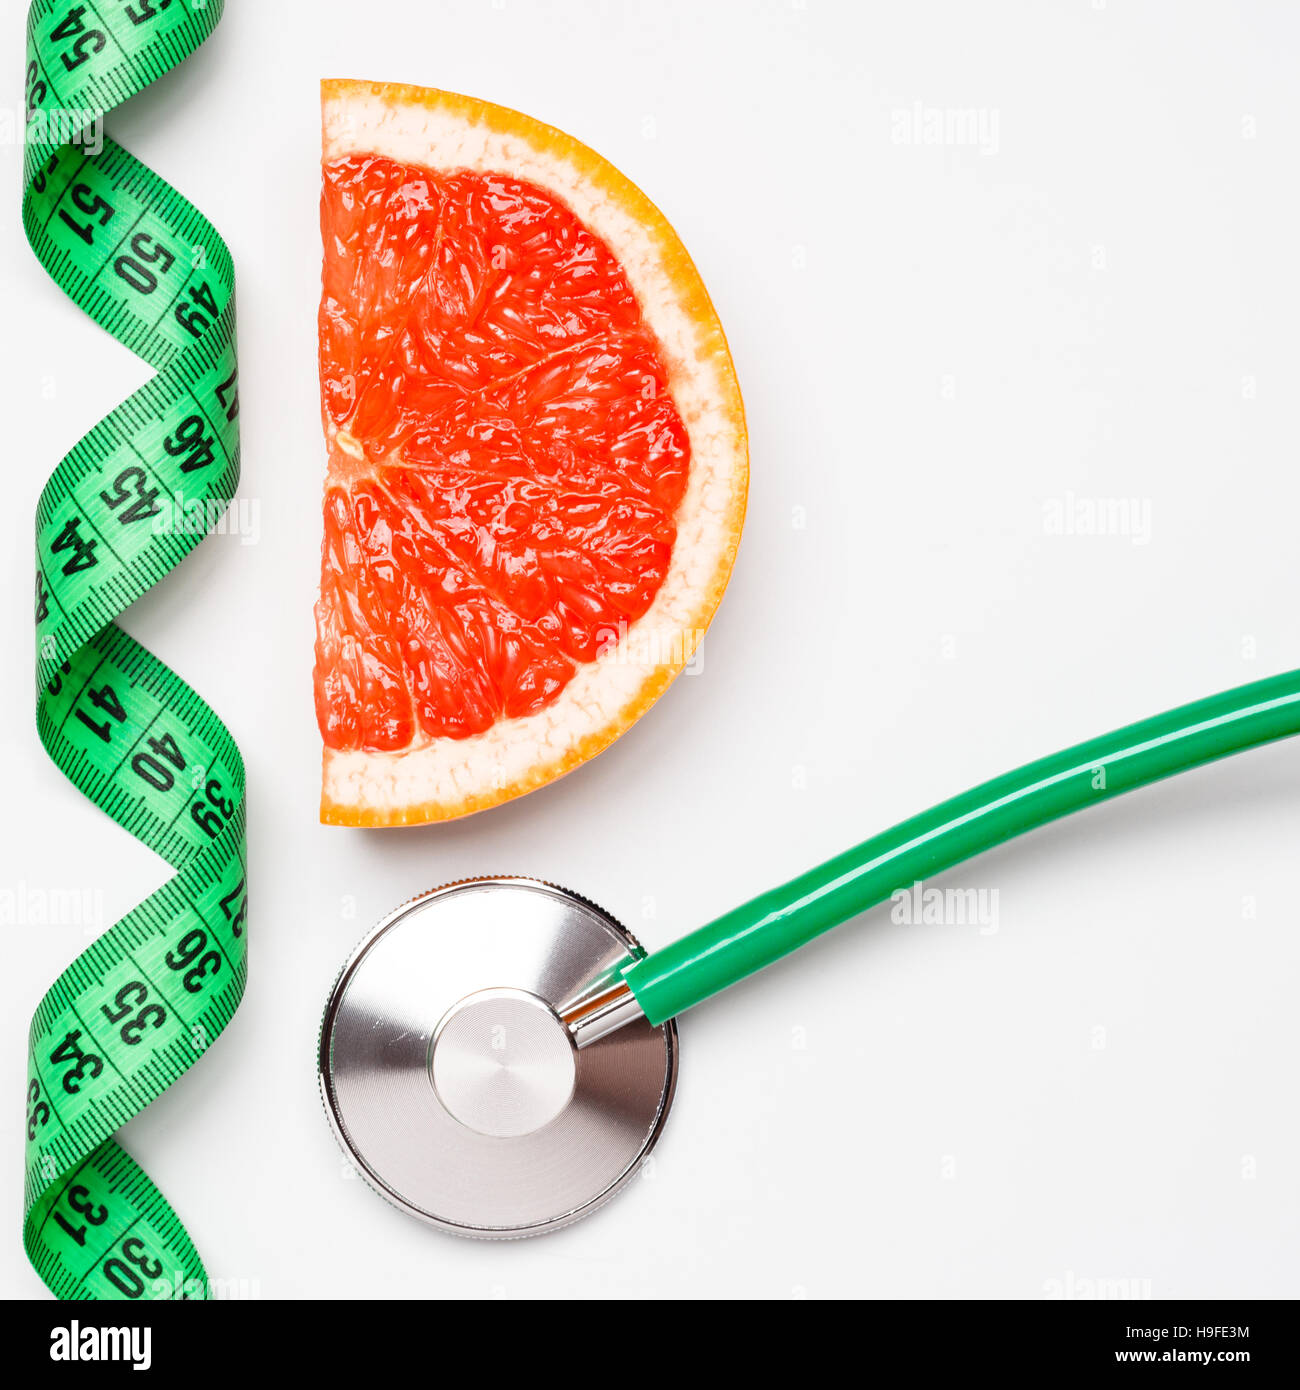 Diet healthy eating weight control concept. Grapefruit with measuring tape and stethoscope on white scales Stock Photo